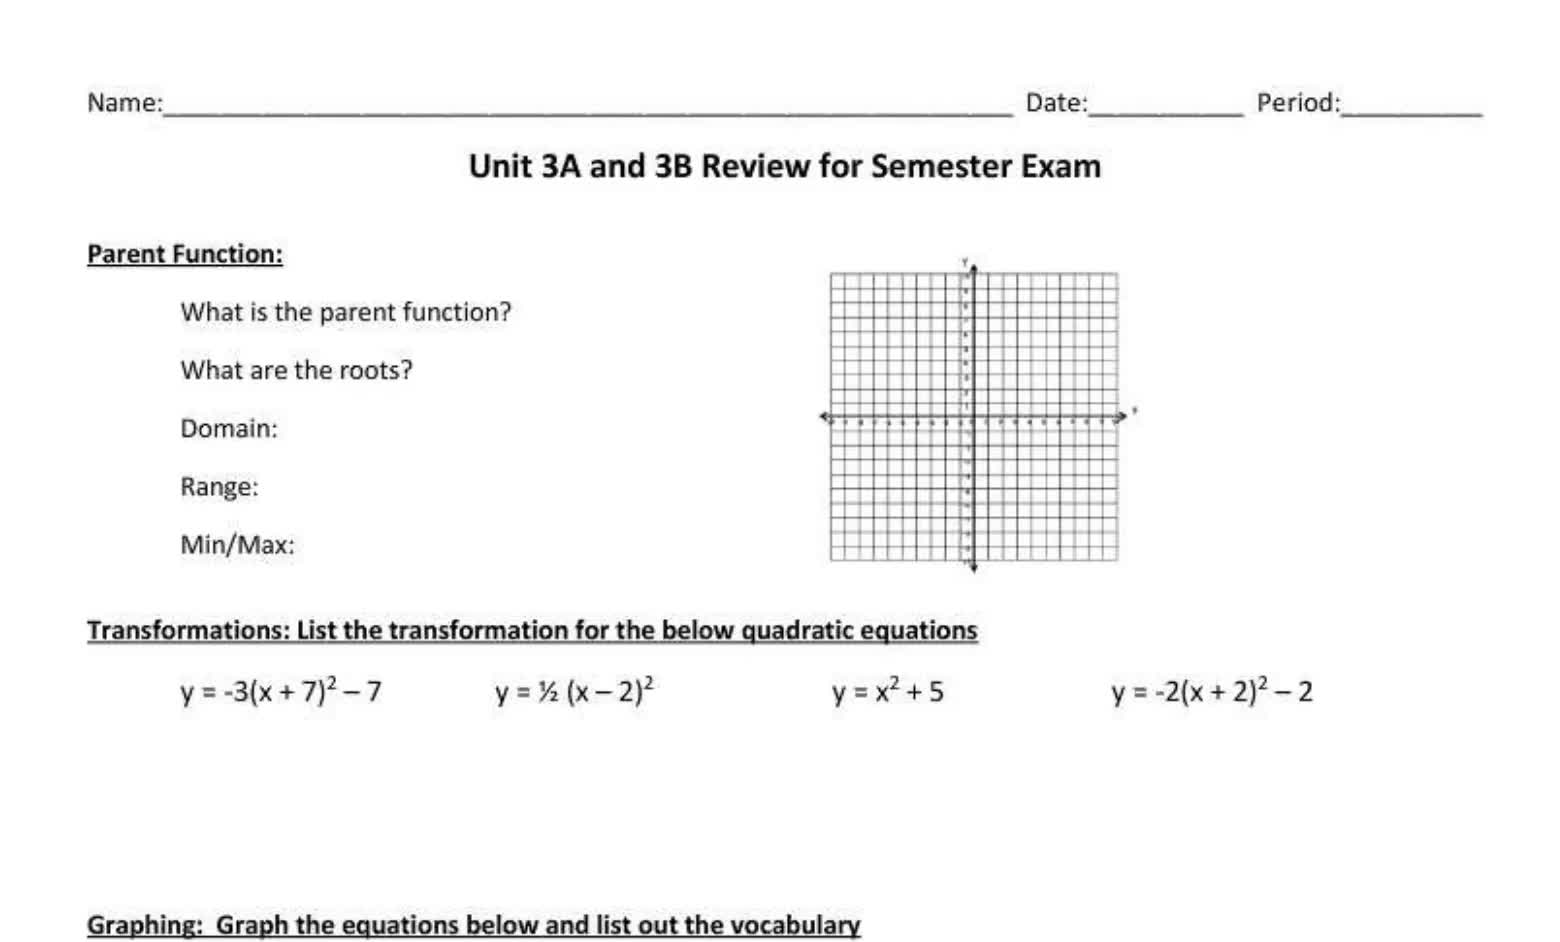 Unit 3A and 3B Final Semester Review